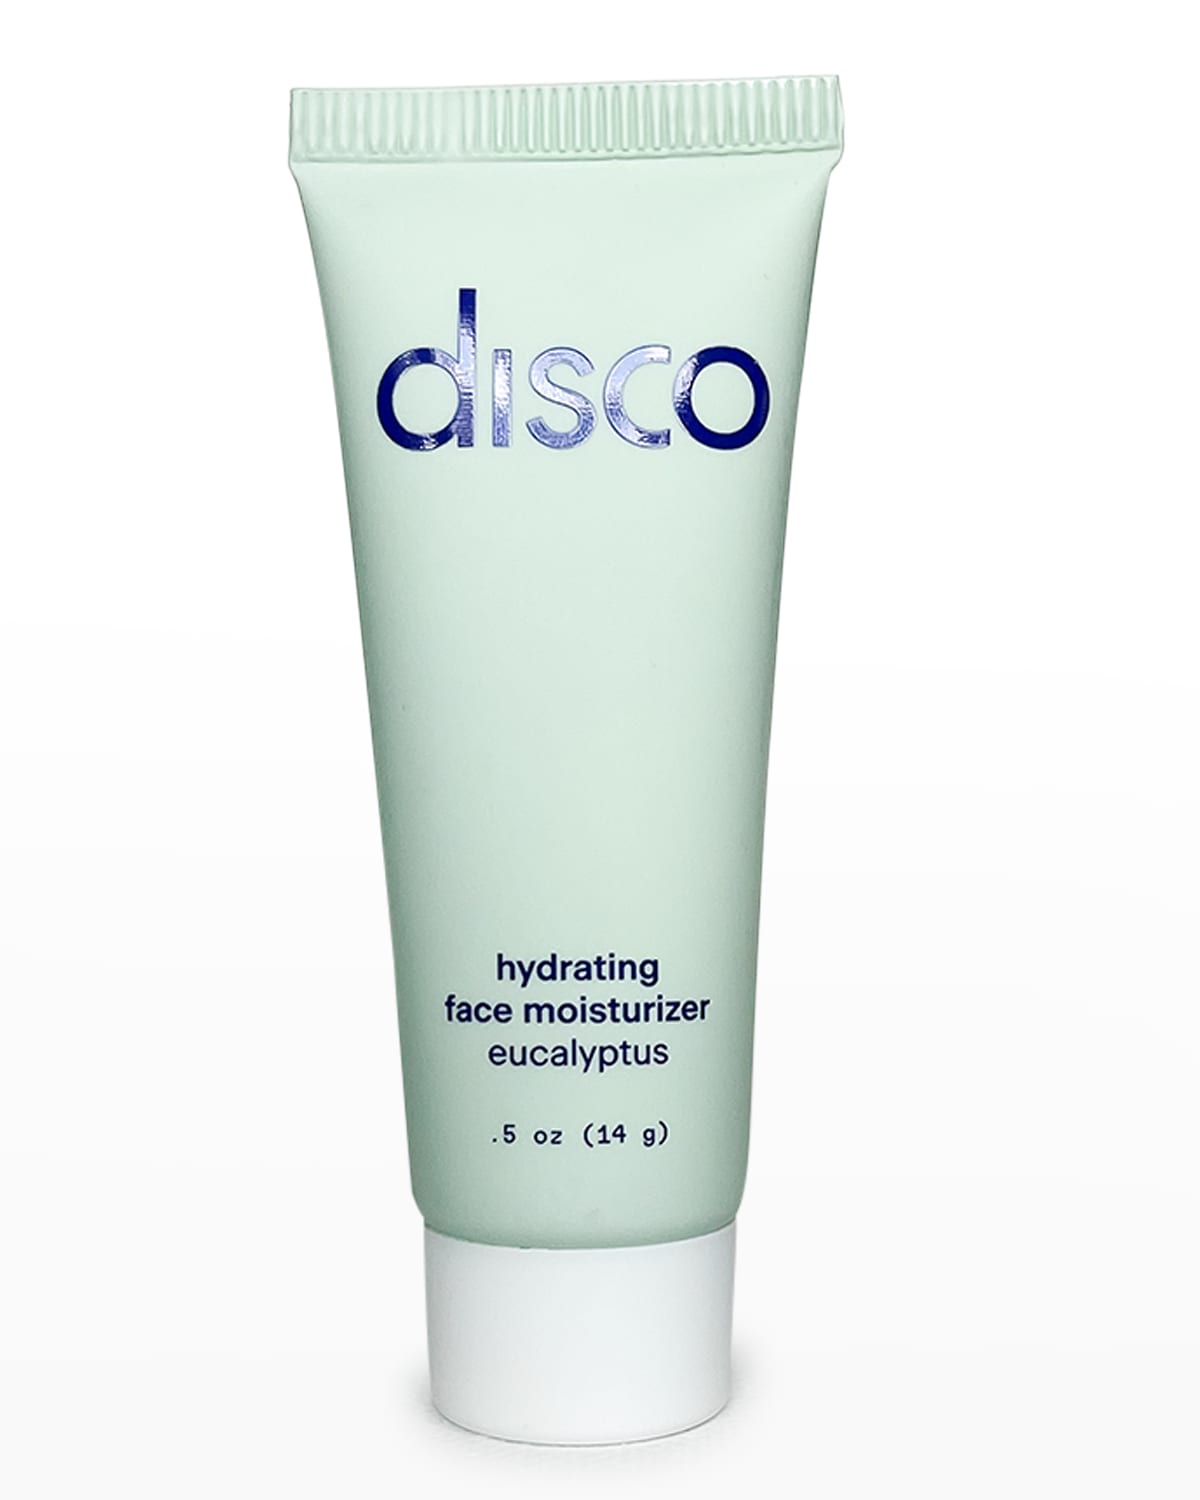 Mini Face Moisturizer Deluxe, Yours with any $50 Disco Purchase